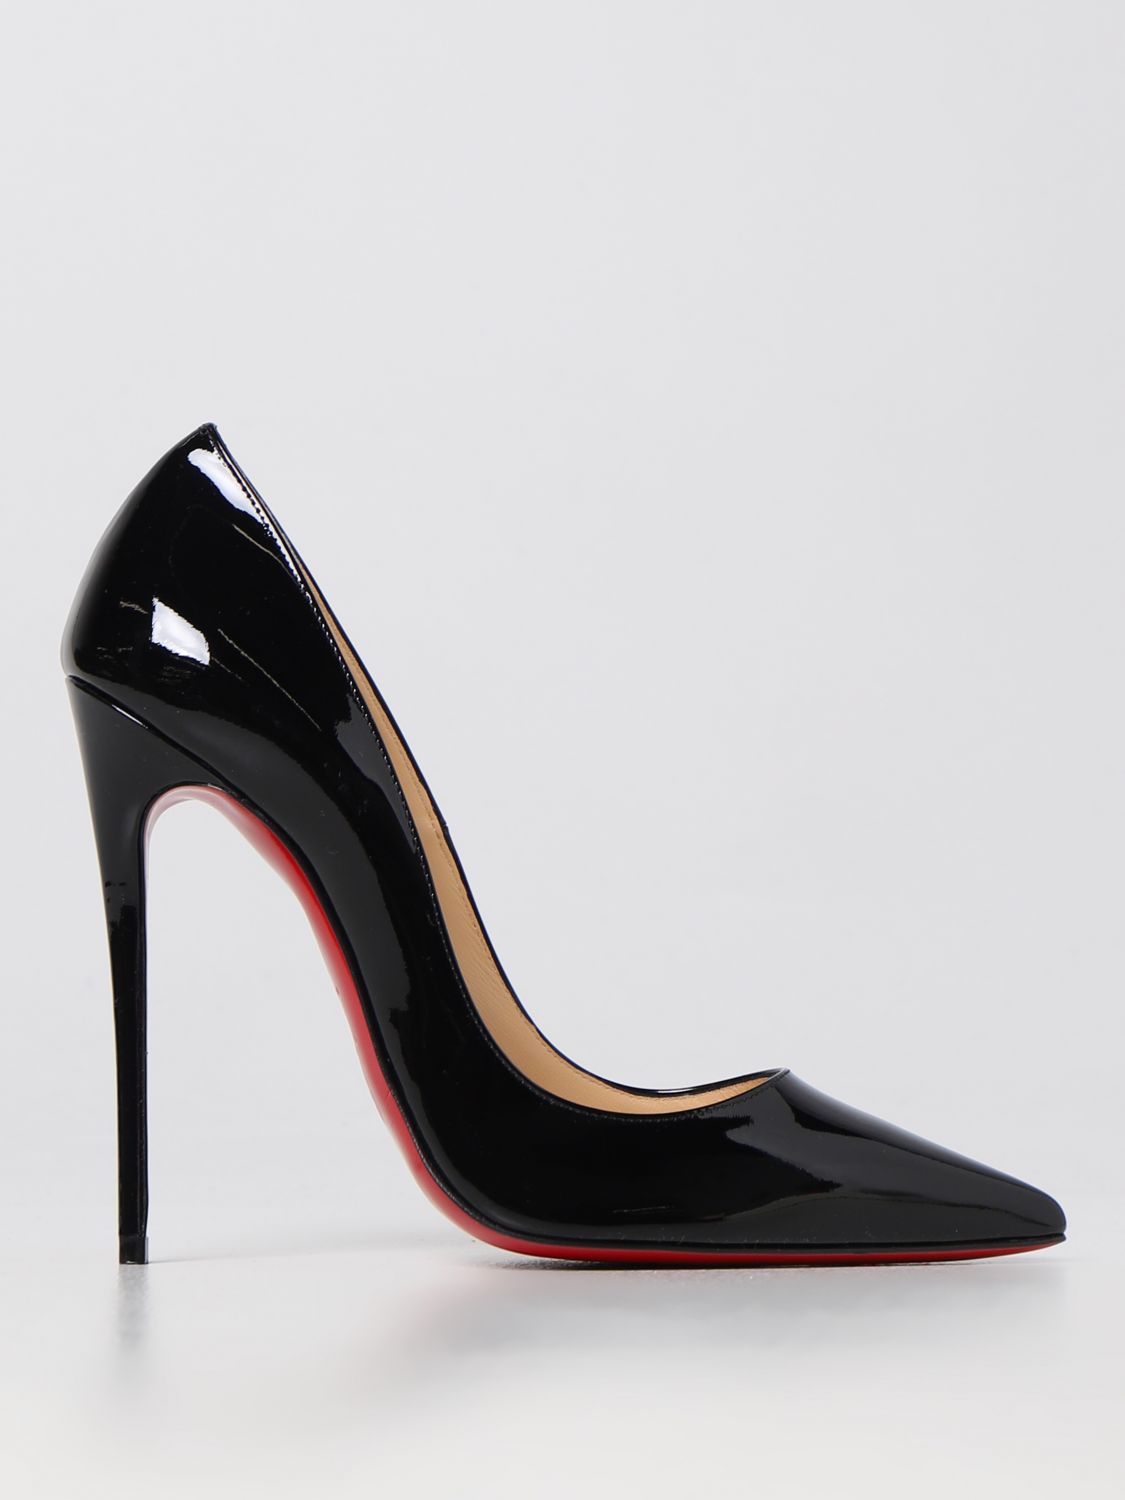 Regn Persona Grudge CHRISTIAN LOUBOUTIN: Kate patent leather pumps - Black | Christian Louboutin  pumps 3130694 online at GIGLIO.COM